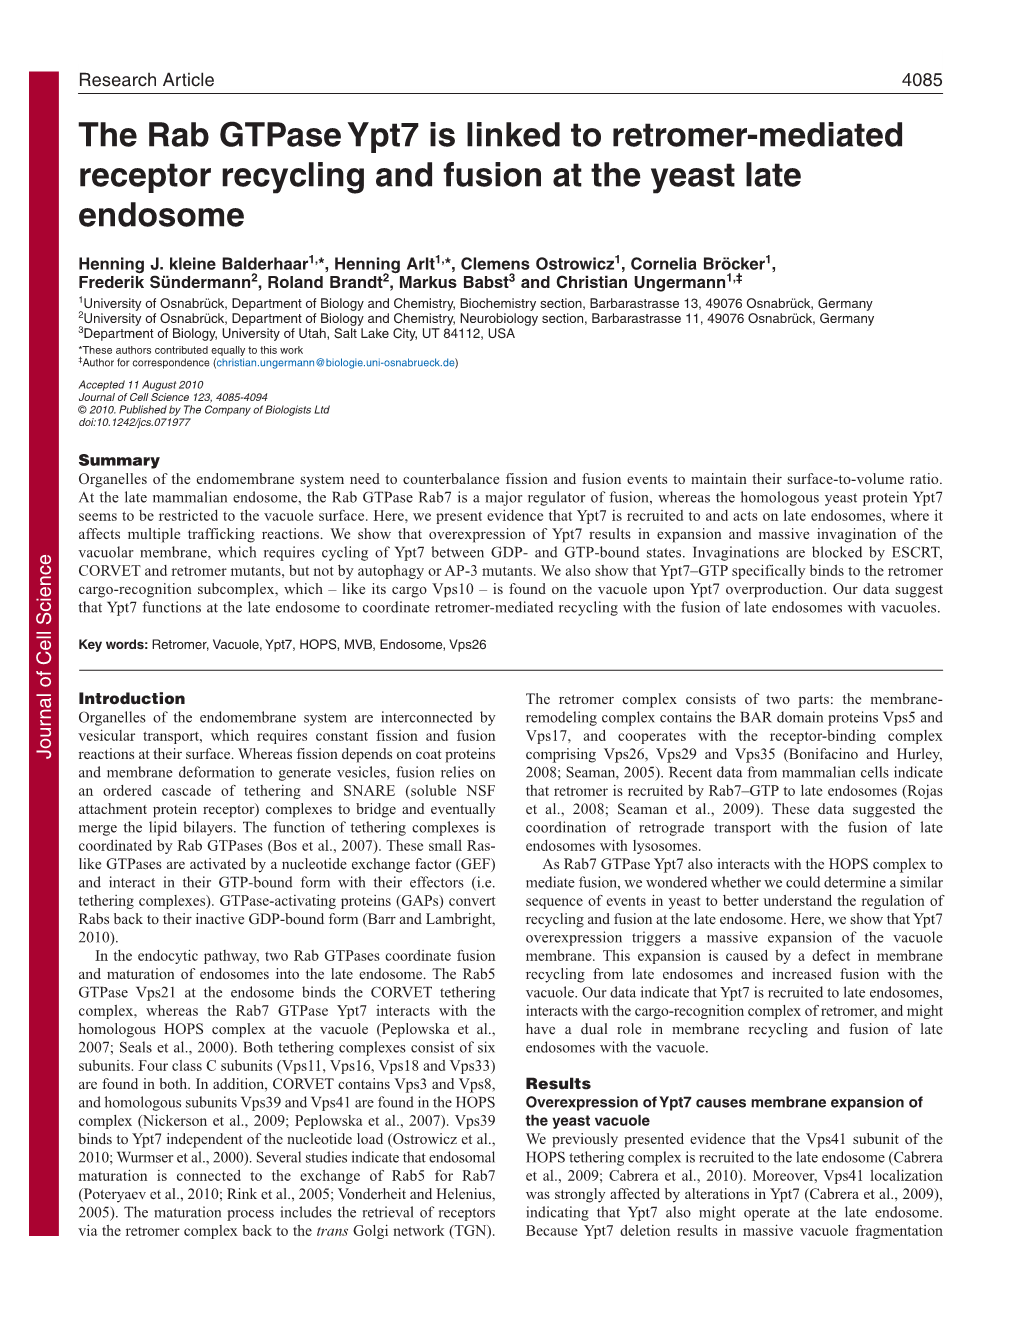 The Rab Gtpase Ypt7 Is Linked to Retromer-Mediated Receptor Recycling and Fusion at the Yeast Late Endosome